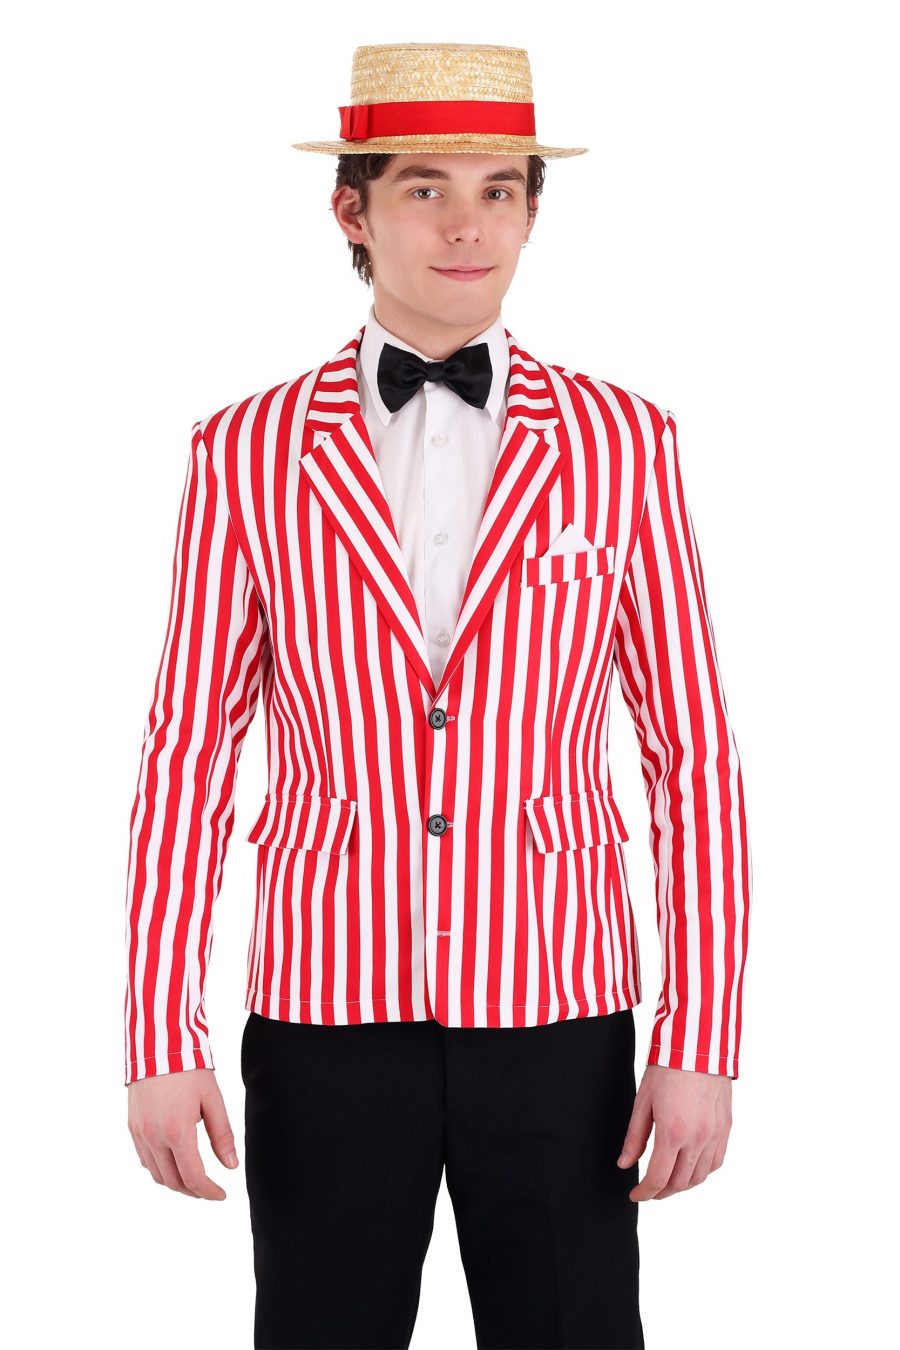 Men's Candy Striped Jacket Costume